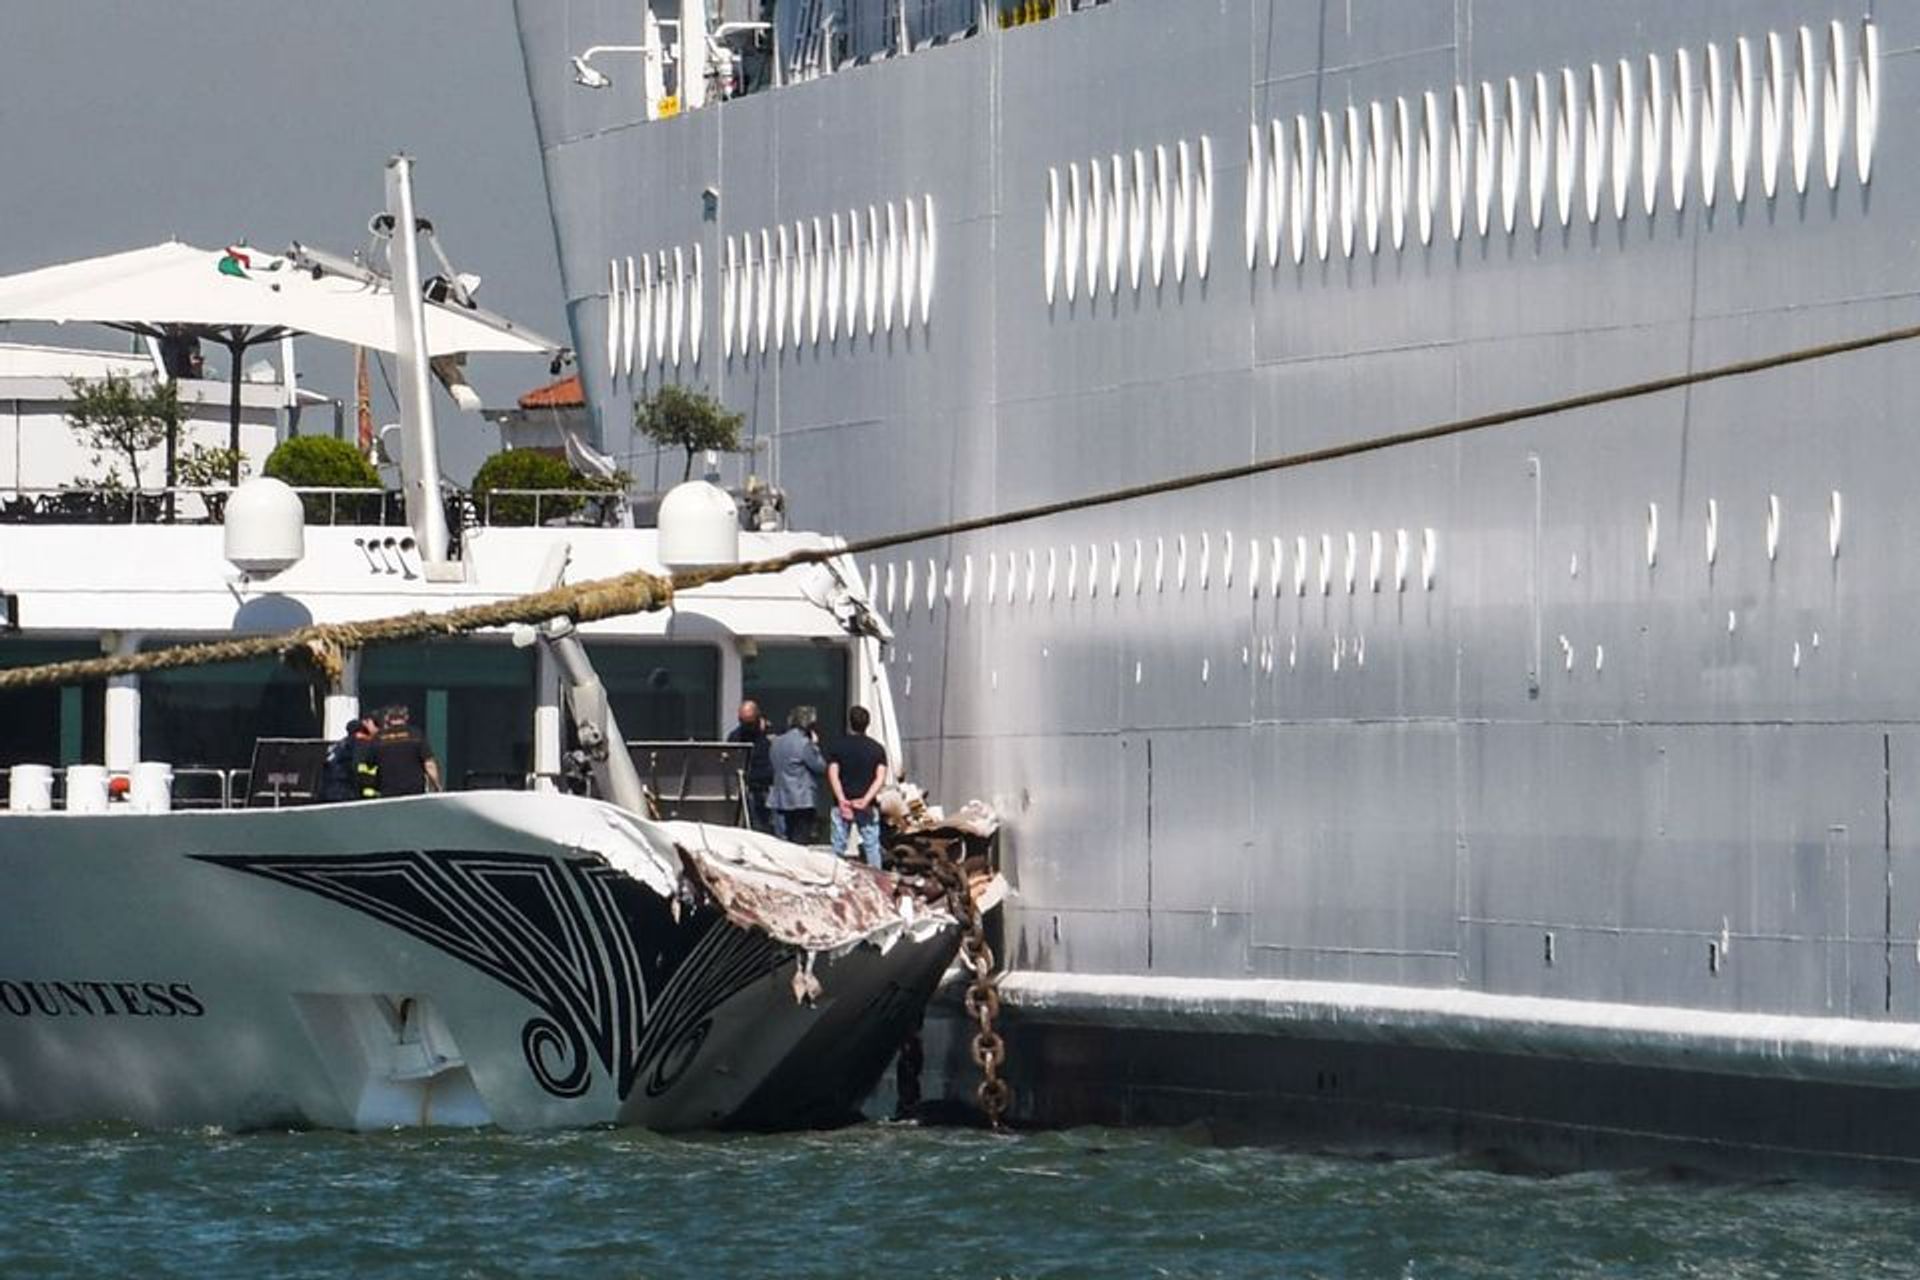 The River Countess tourist boat was hit by the MSC Opera cruise ship in Venice last year © Andrea Pattaro/AFP/Getty Images